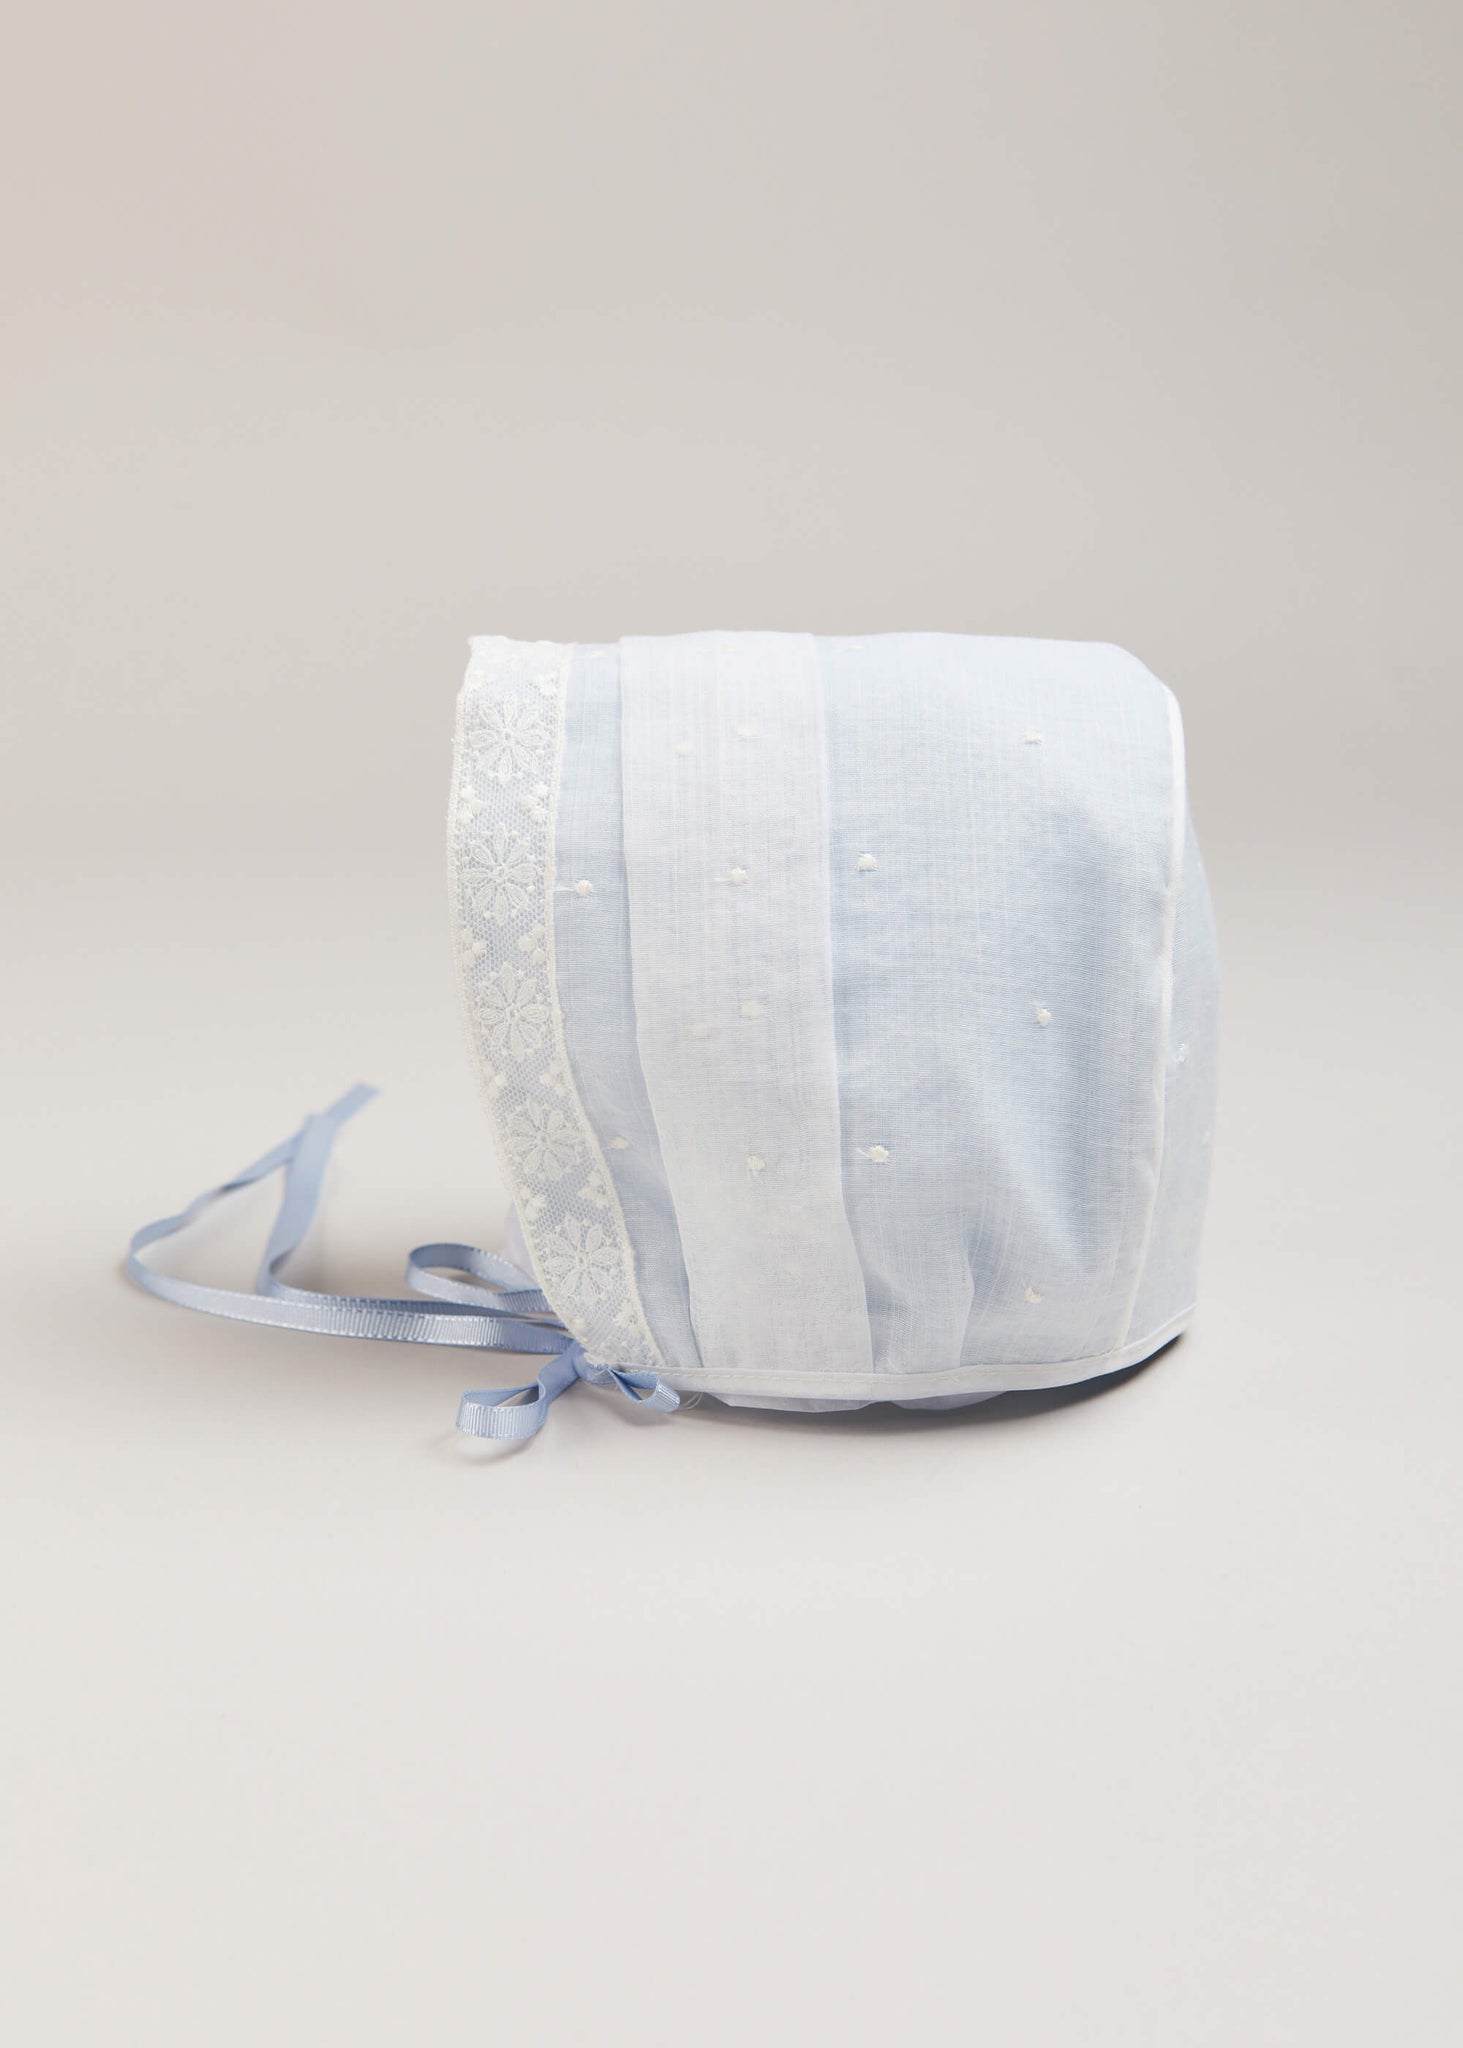 Lace Trim Embroidered Bonnet in Pale Blue (3mths-2yrs) Bonnets  from Pepa London